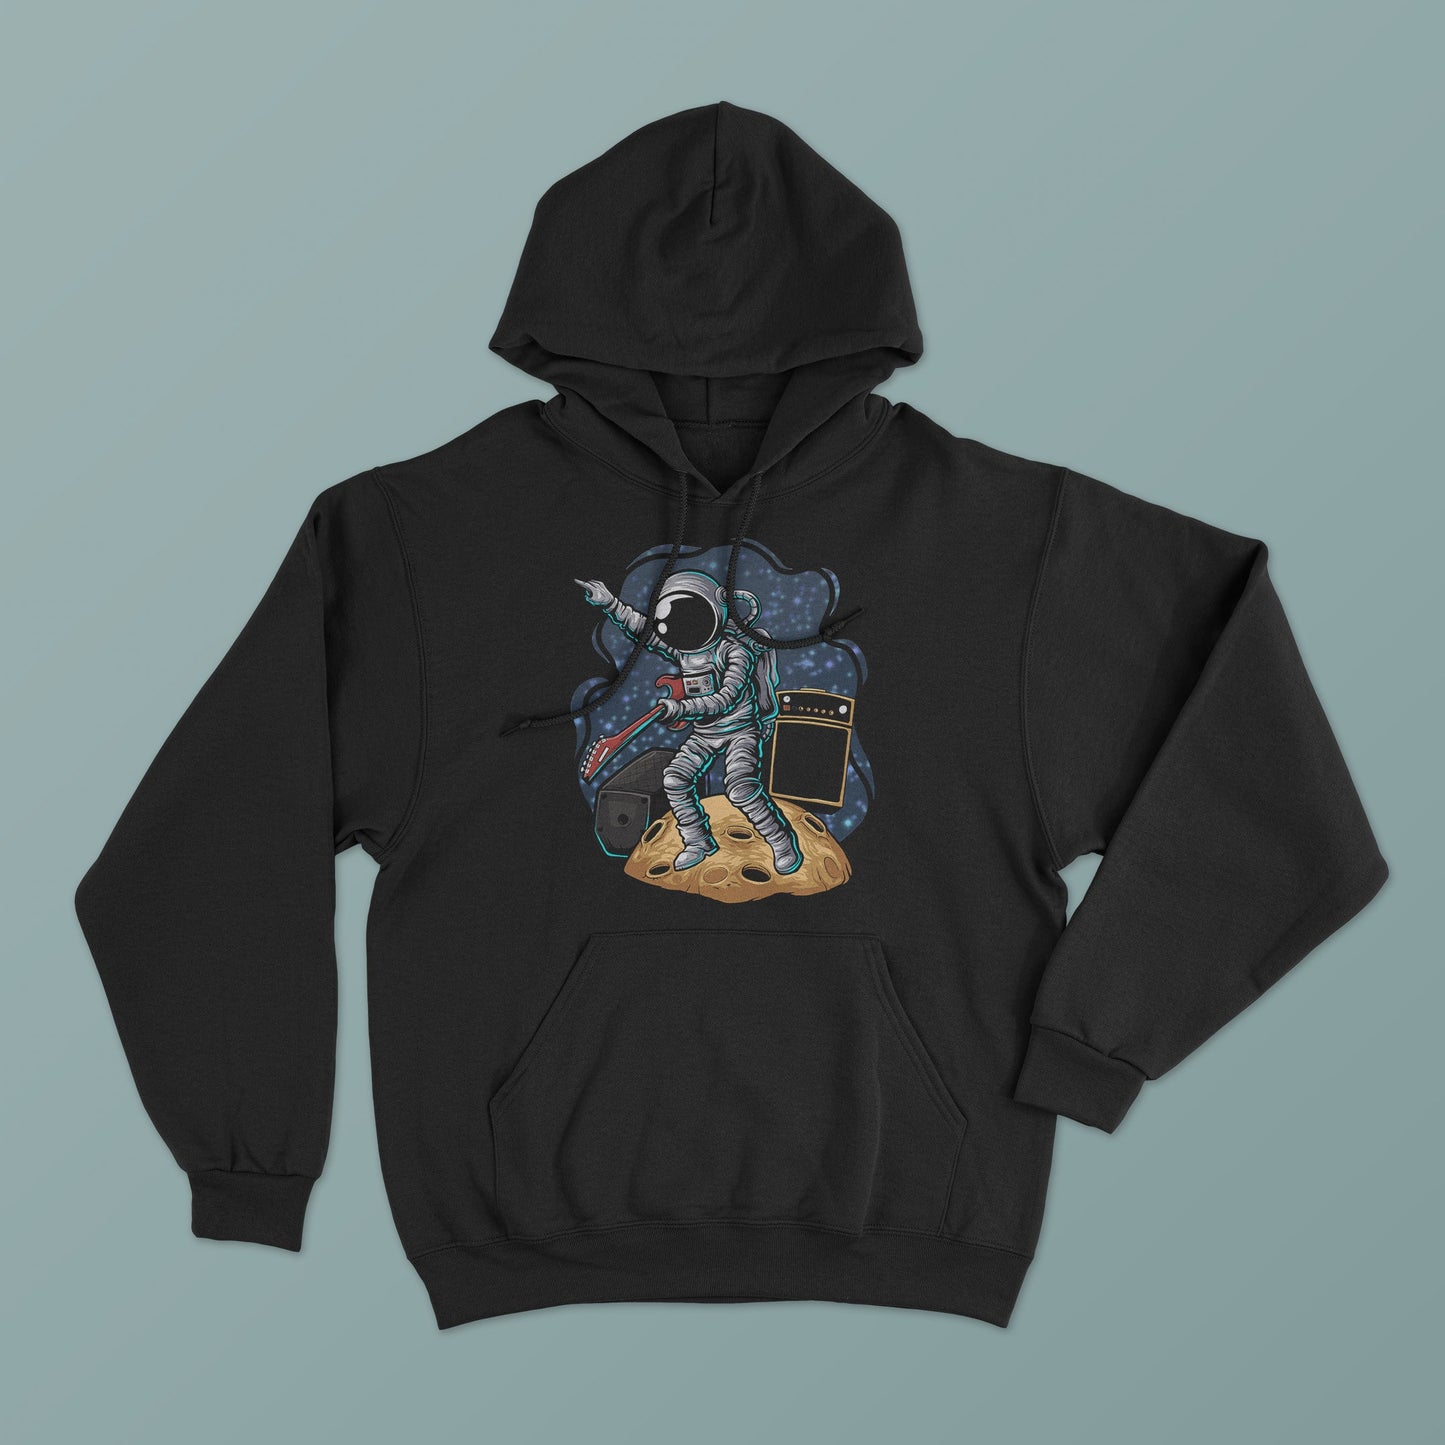 Astronaut Guitarist Space Hoodie - Cosmic Style with Musical Flair, Unisex, Men's, Women's  Hooded Sweatshirt, Space and Planets